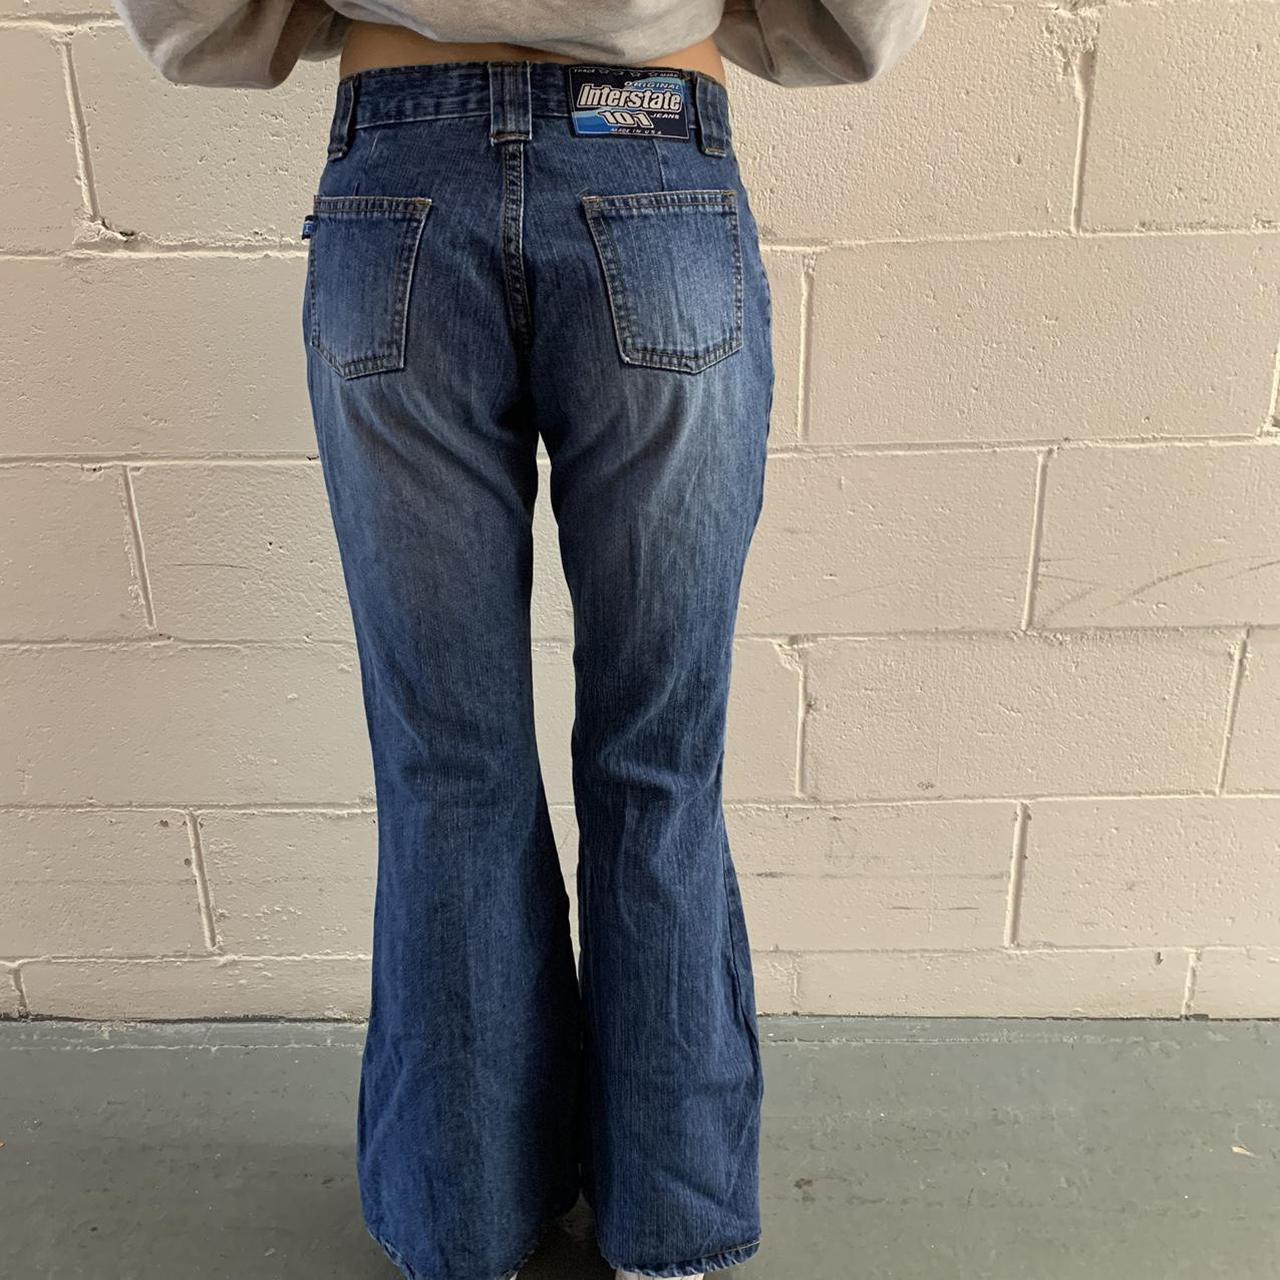 Vintage Interstate 101 flare jeans in blue. From the... - Depop